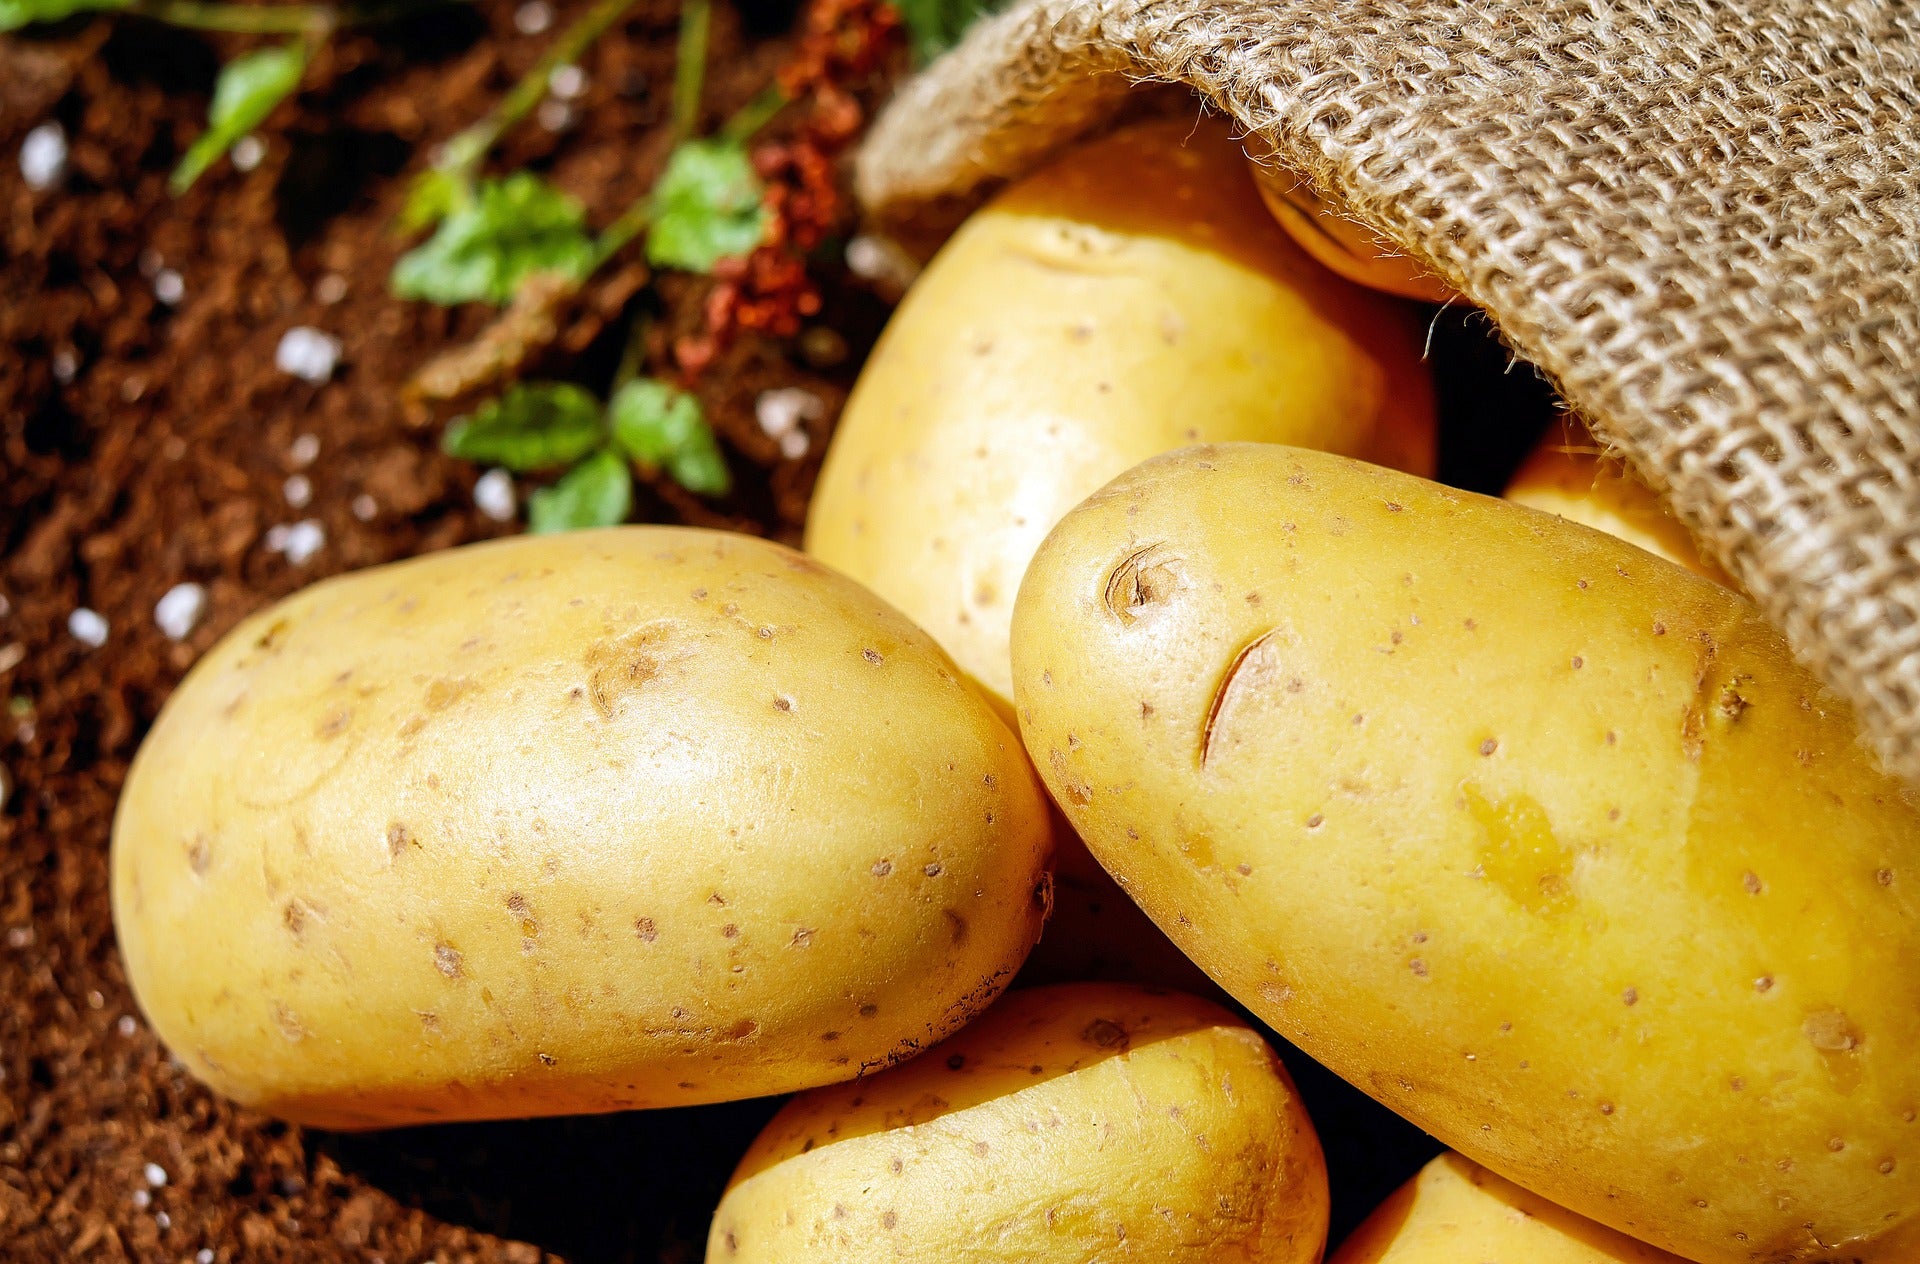 How To: Grow Potatoes In Planters